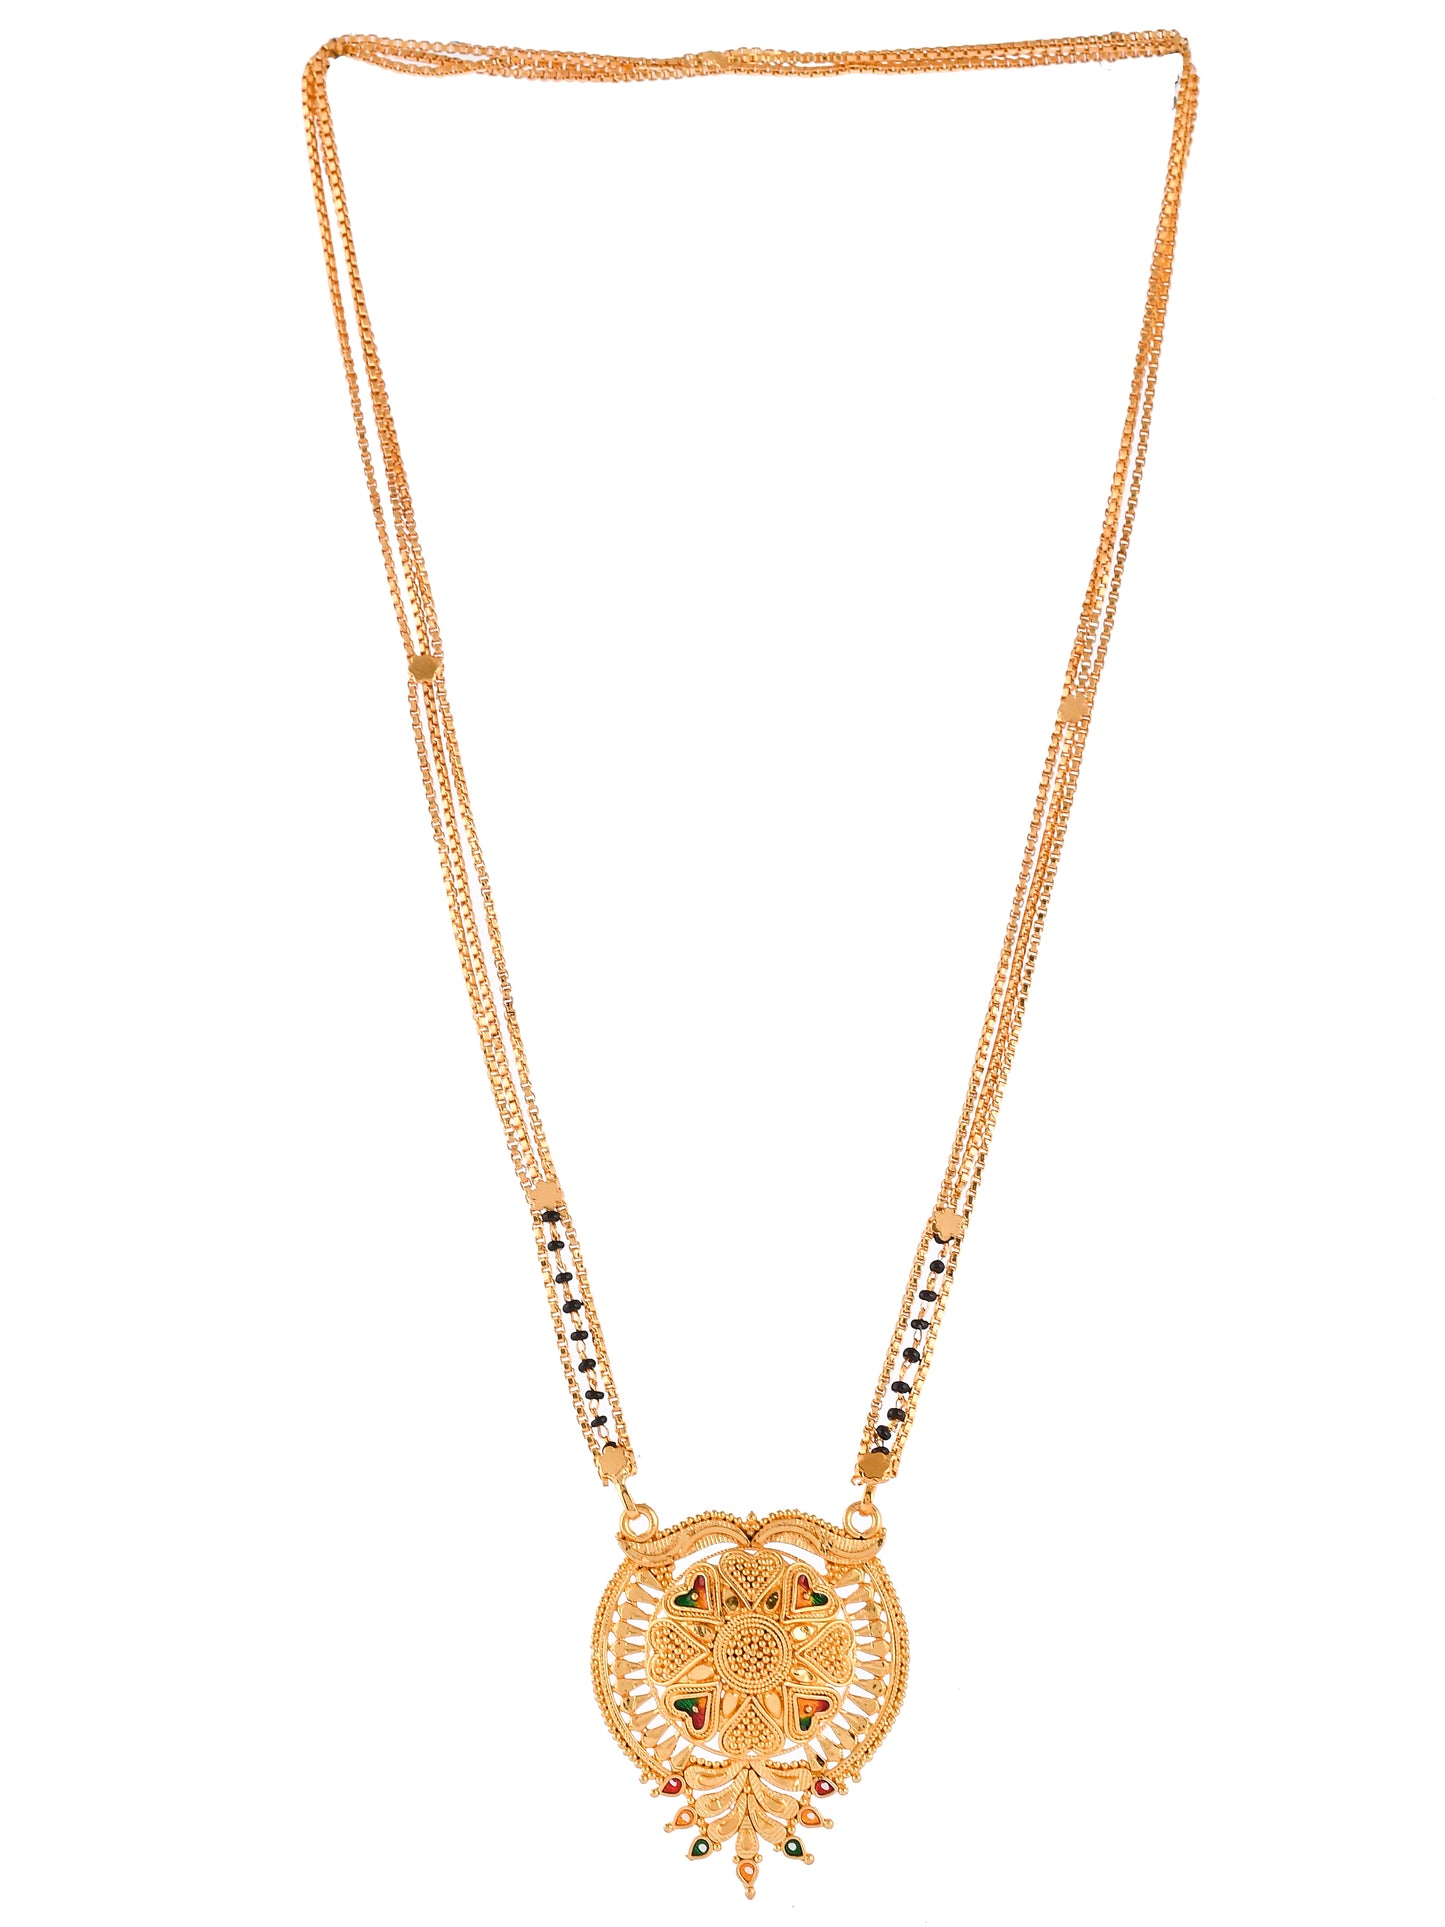 Vasudha Gold Plated Mangalsutra Chain Necklace